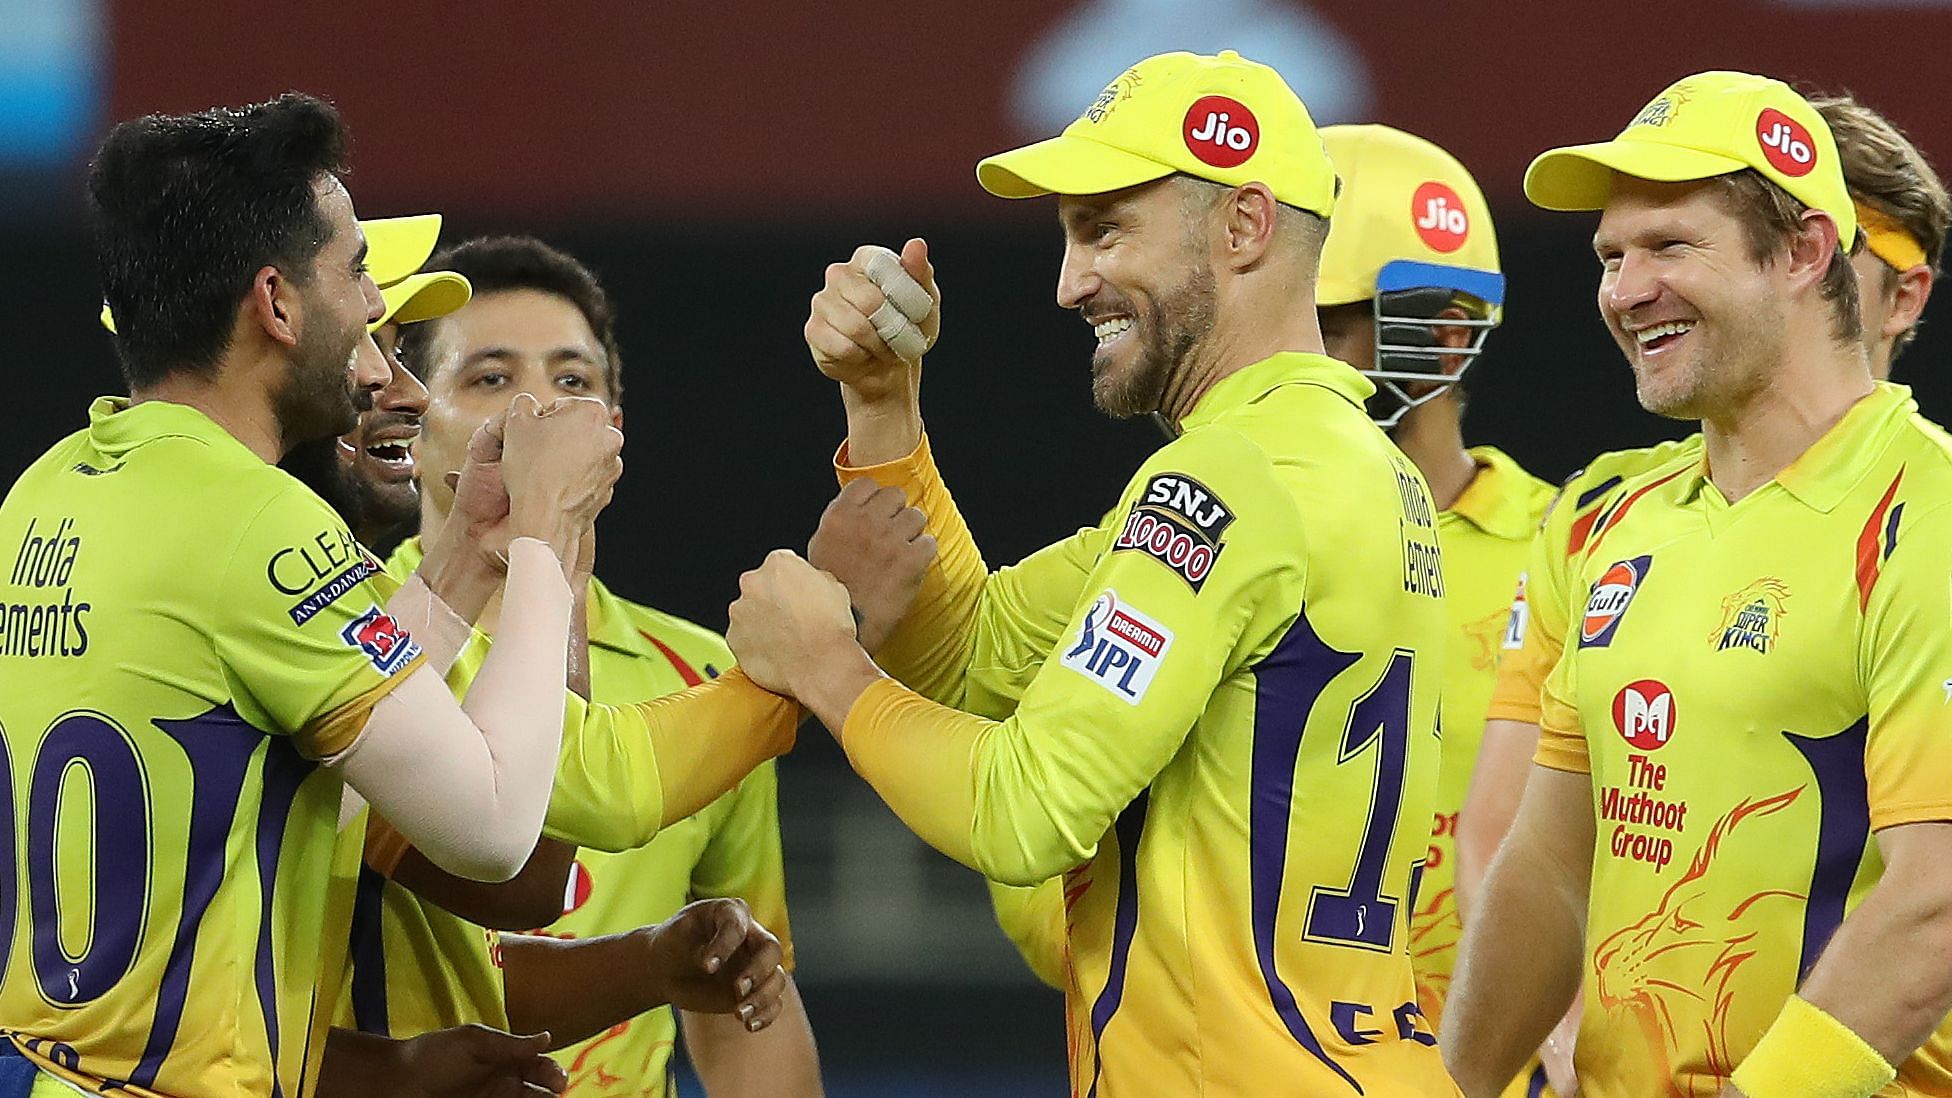 Chennai Super Kings are playing after a gap of 6 days, facing Sunrisers Hyderabad.